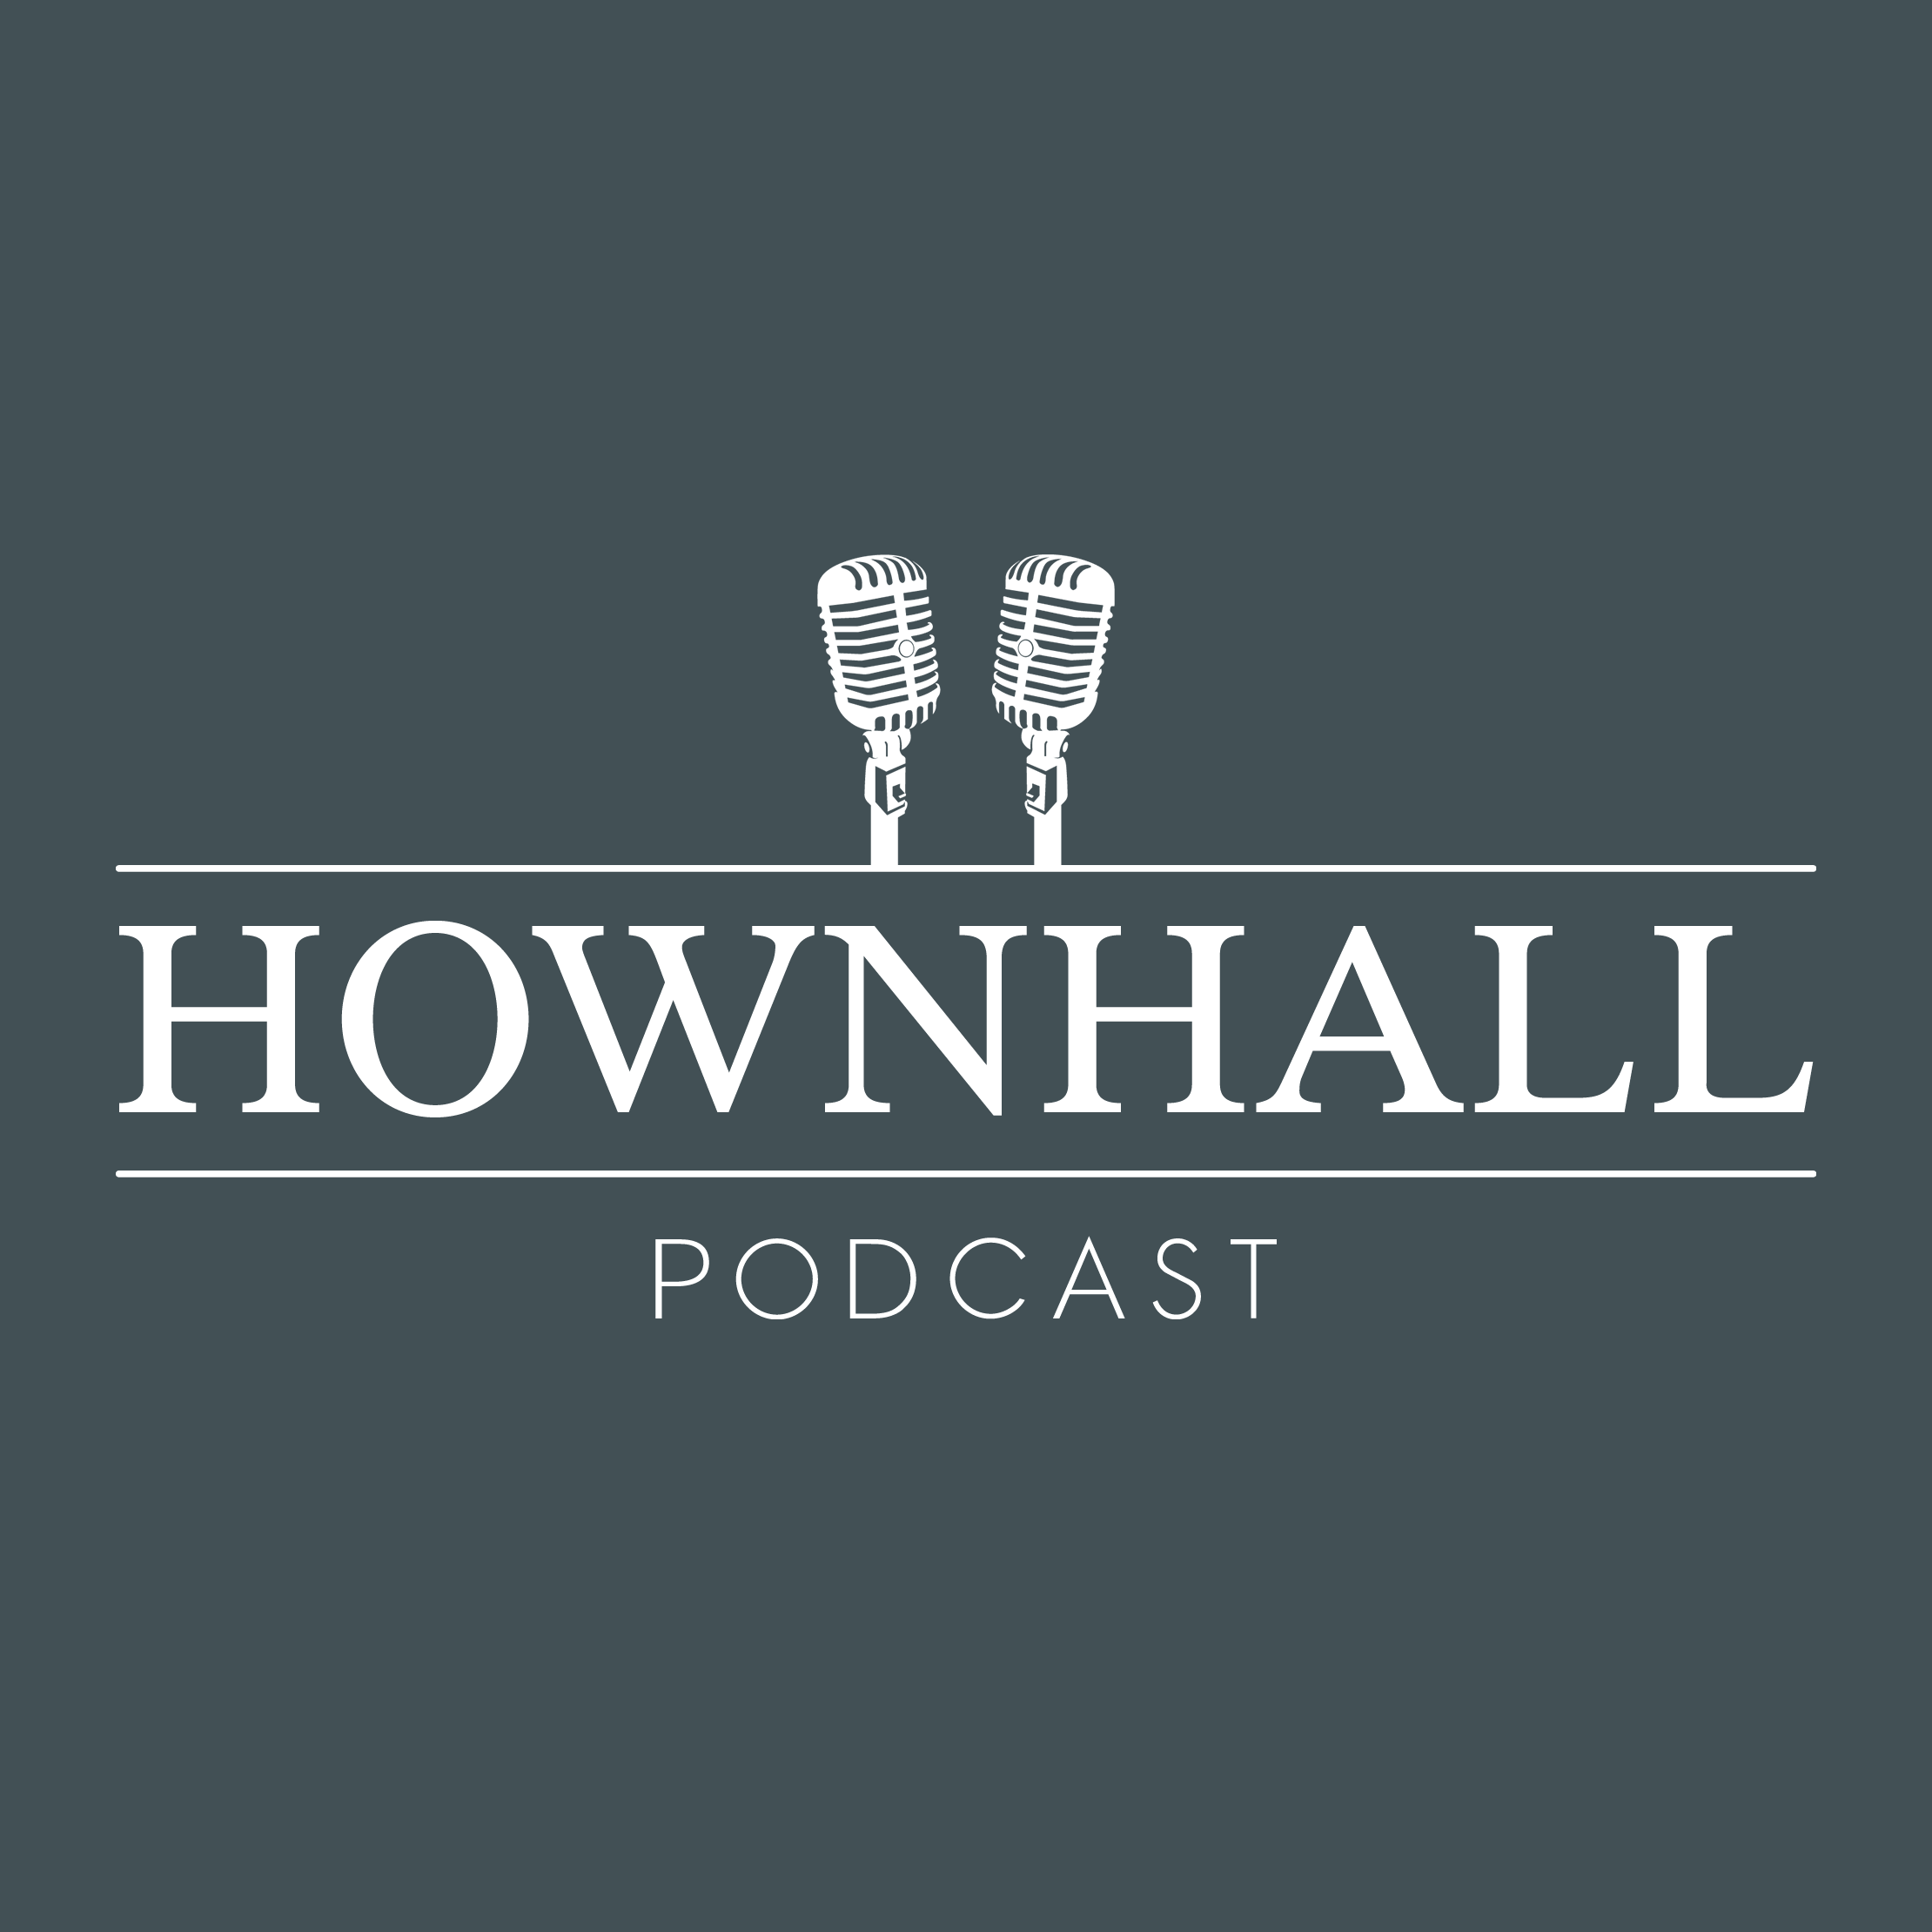 The Hownhall Podcast